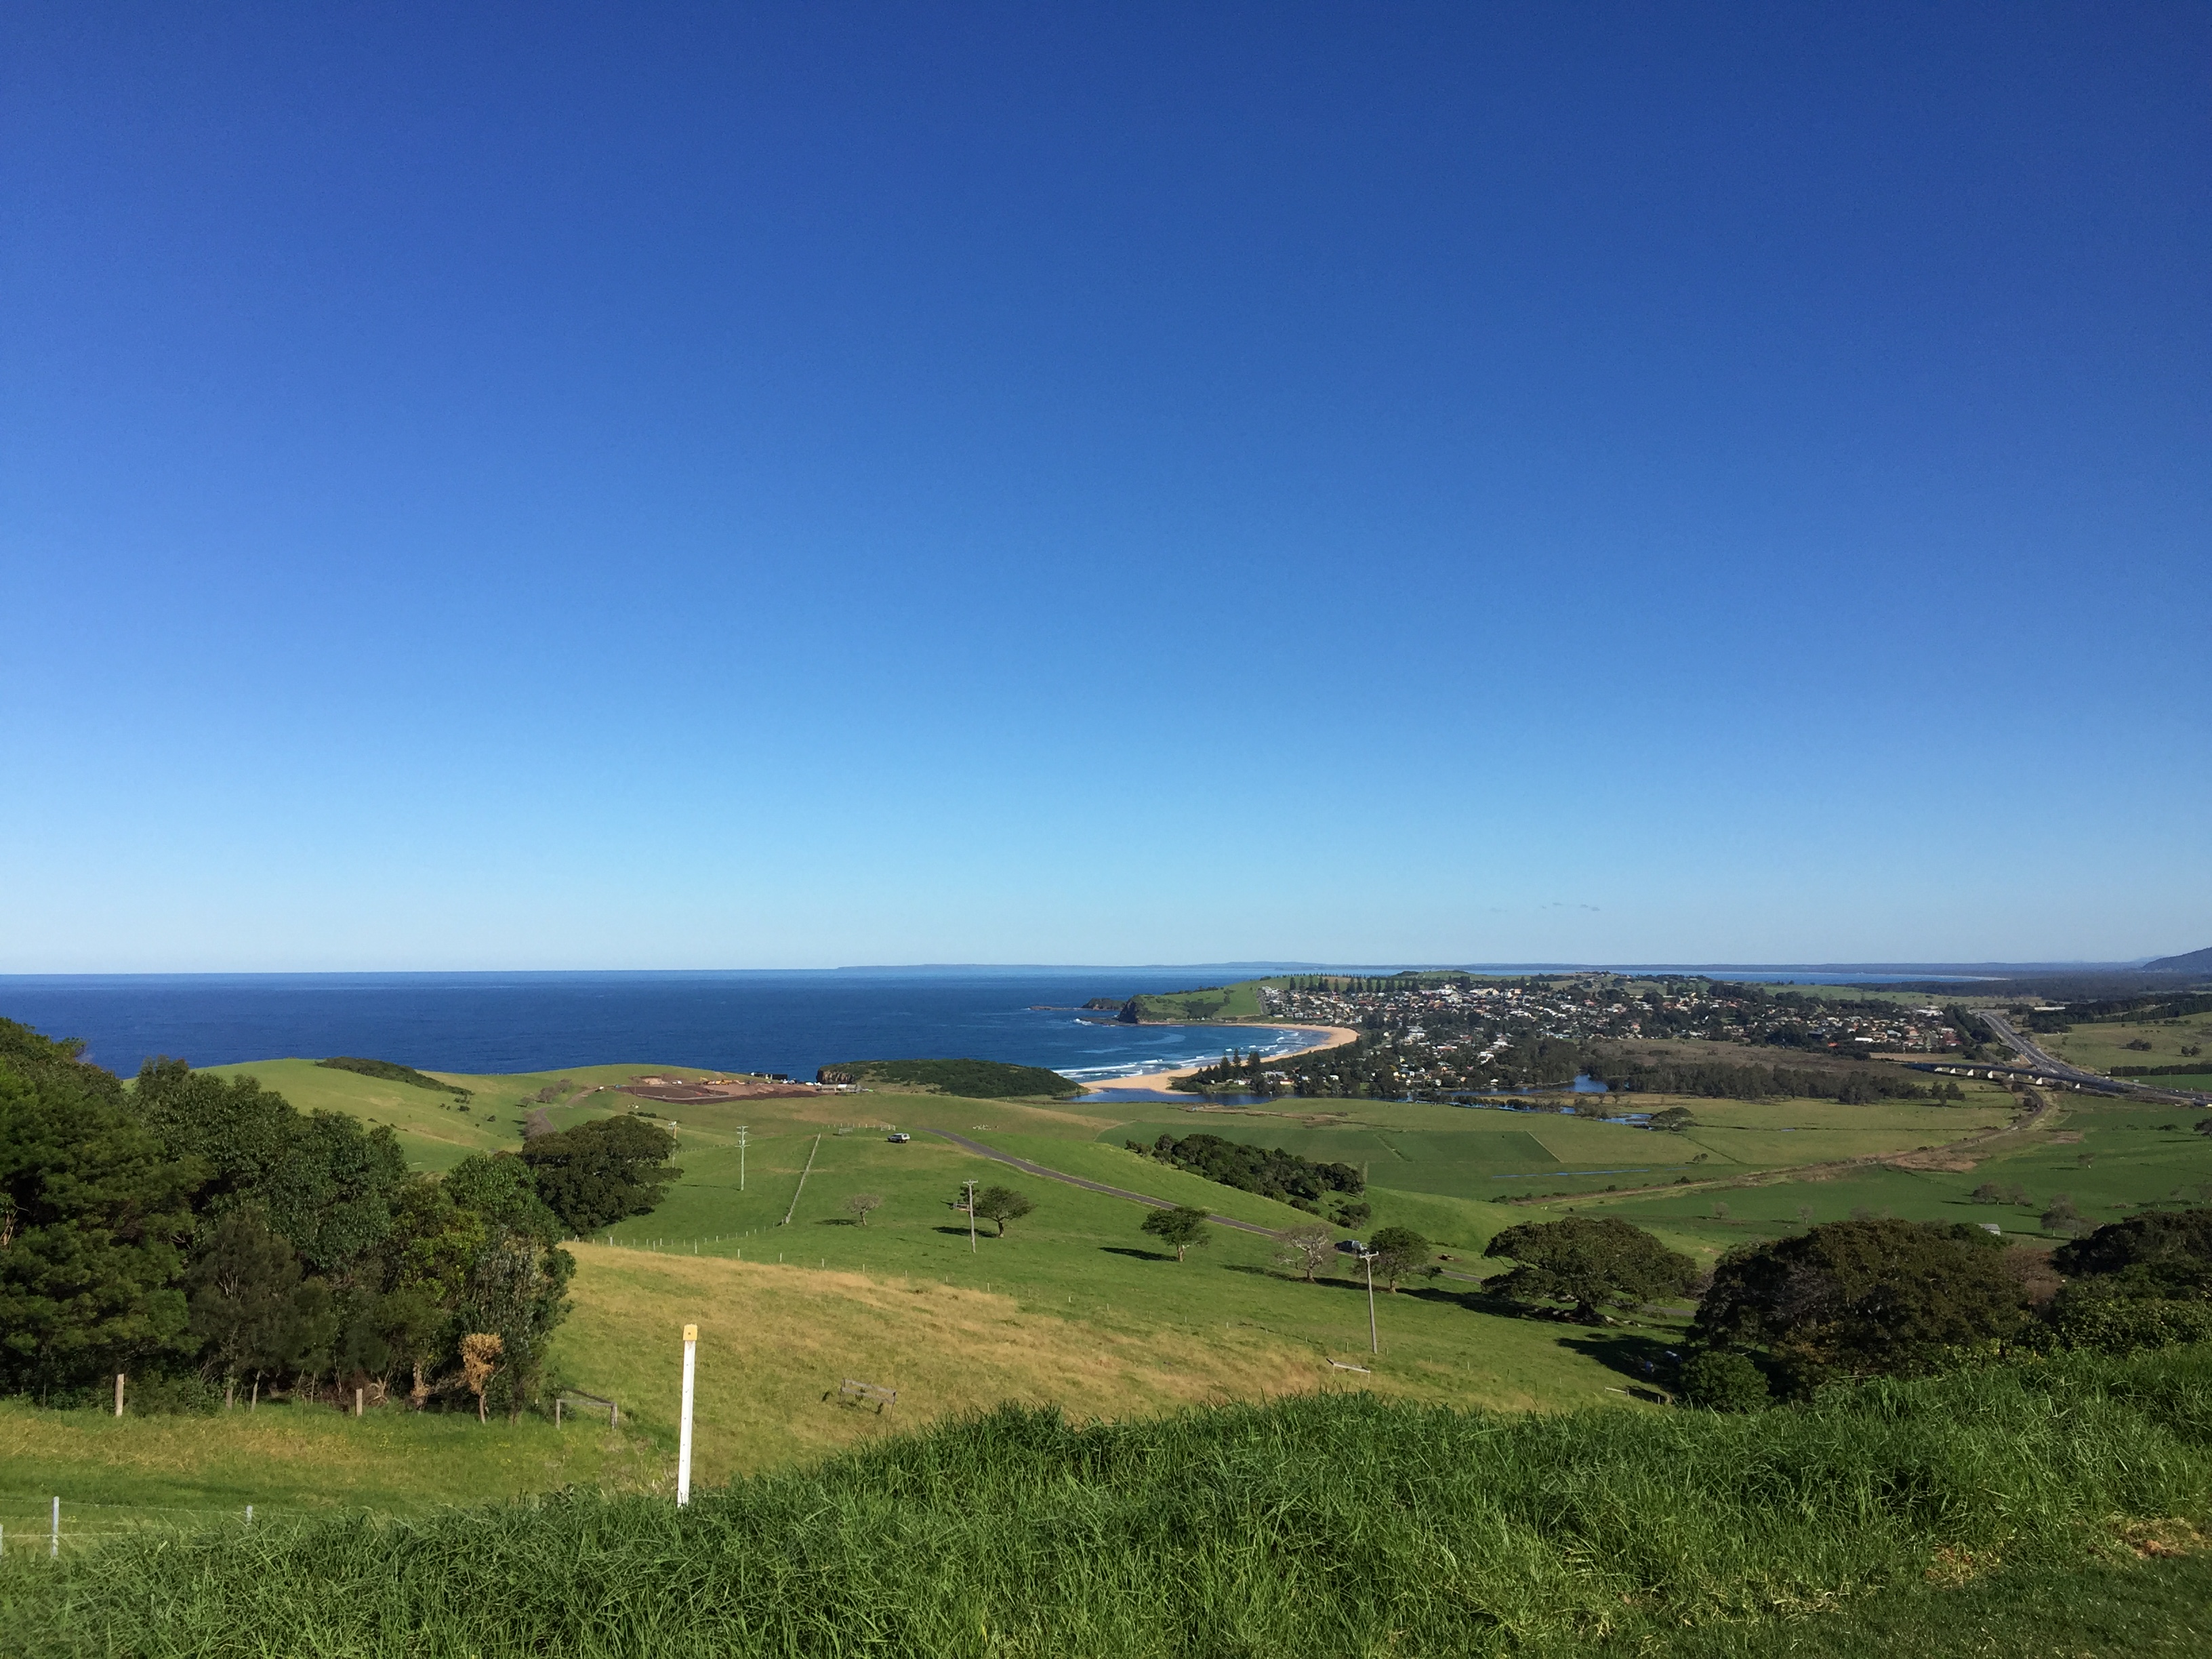 View of Kiama from the hills behind